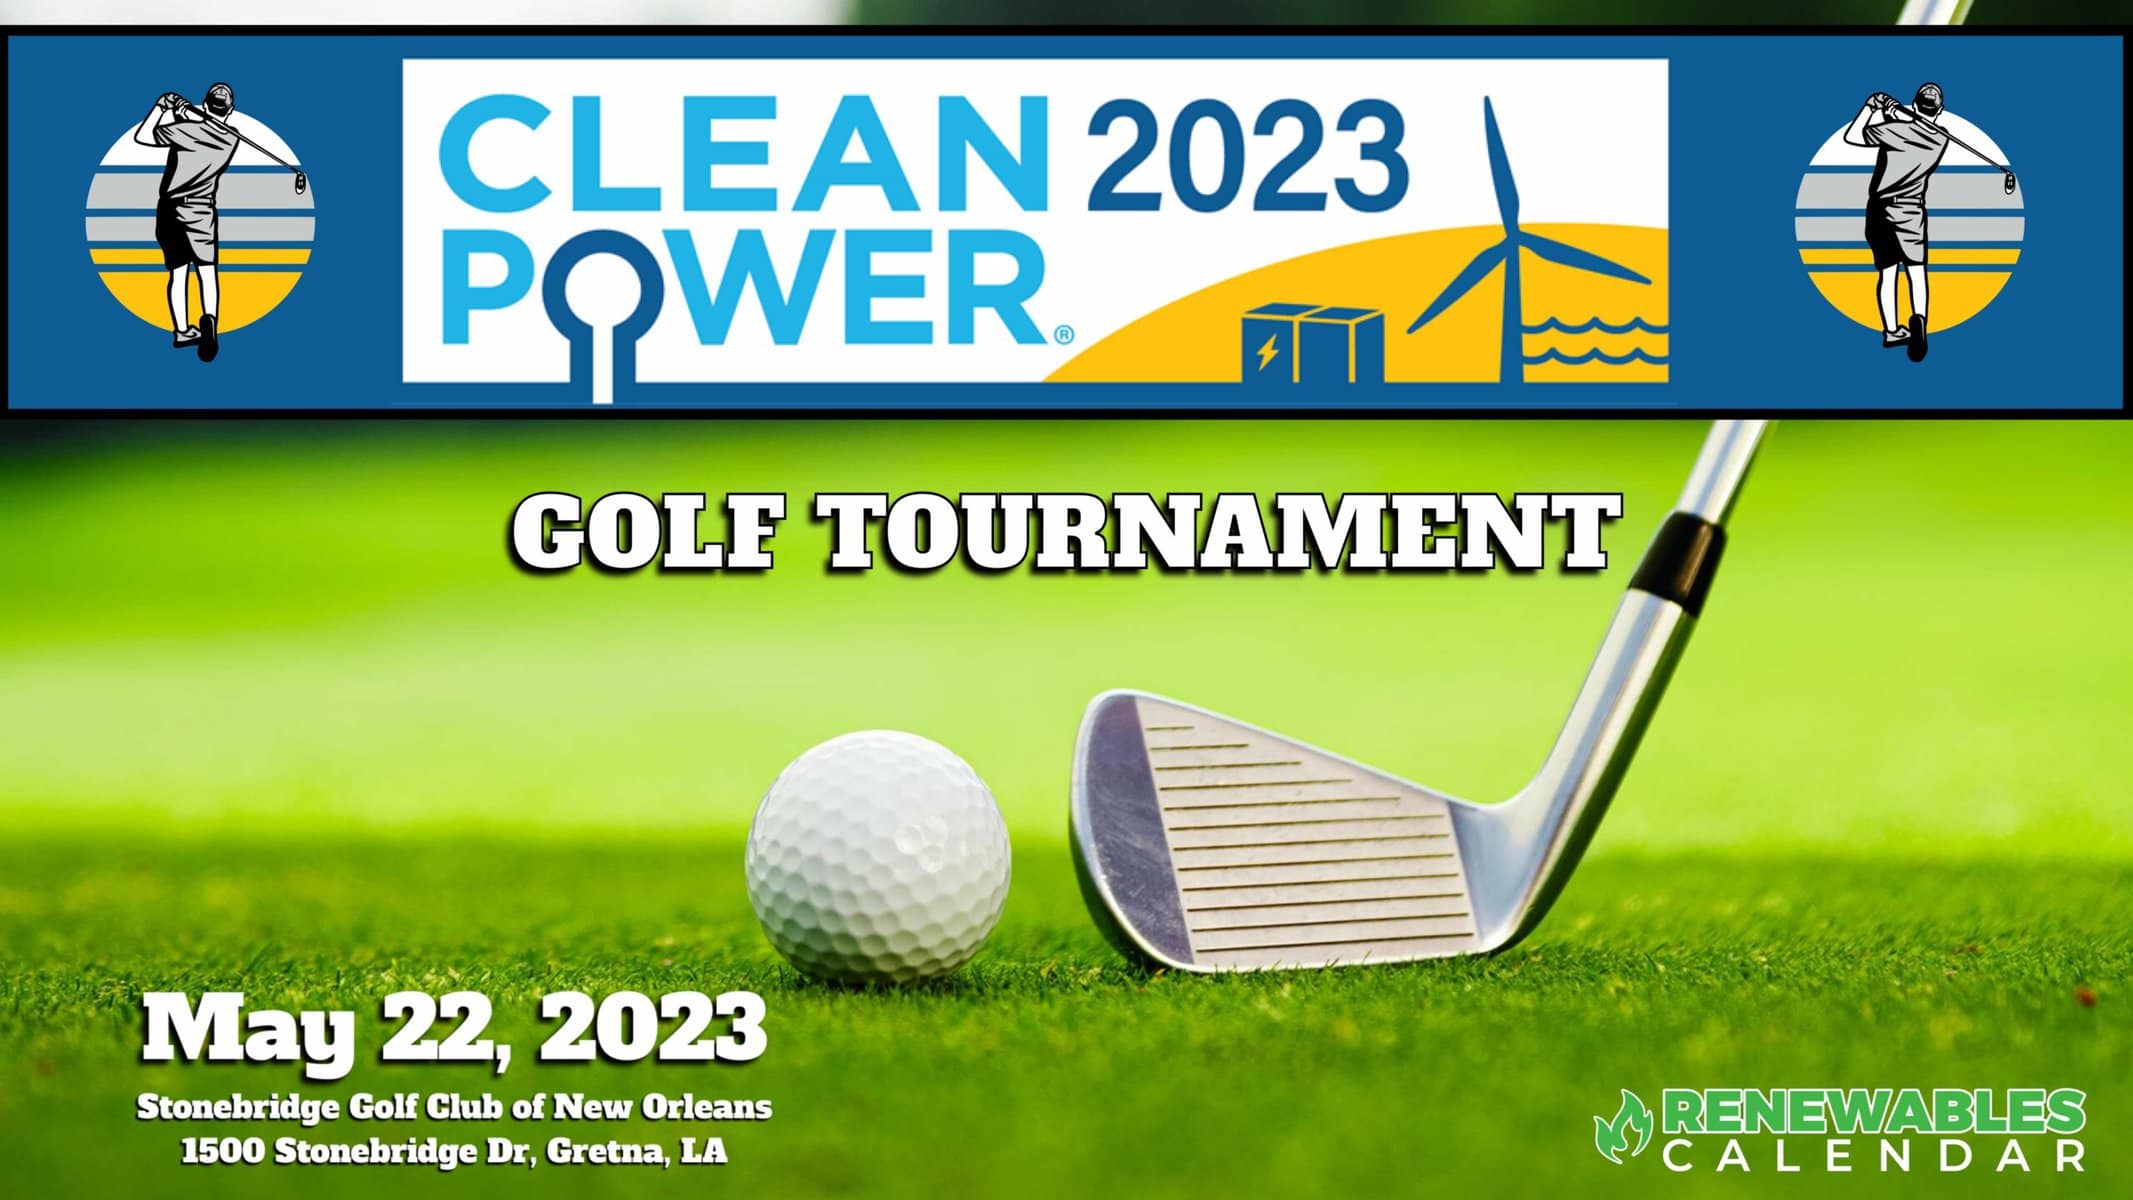 Register Now for the CLEANPOWER 2023 Golf Open – Sponsored by RNWBL May 22, 2023 – New Orleans